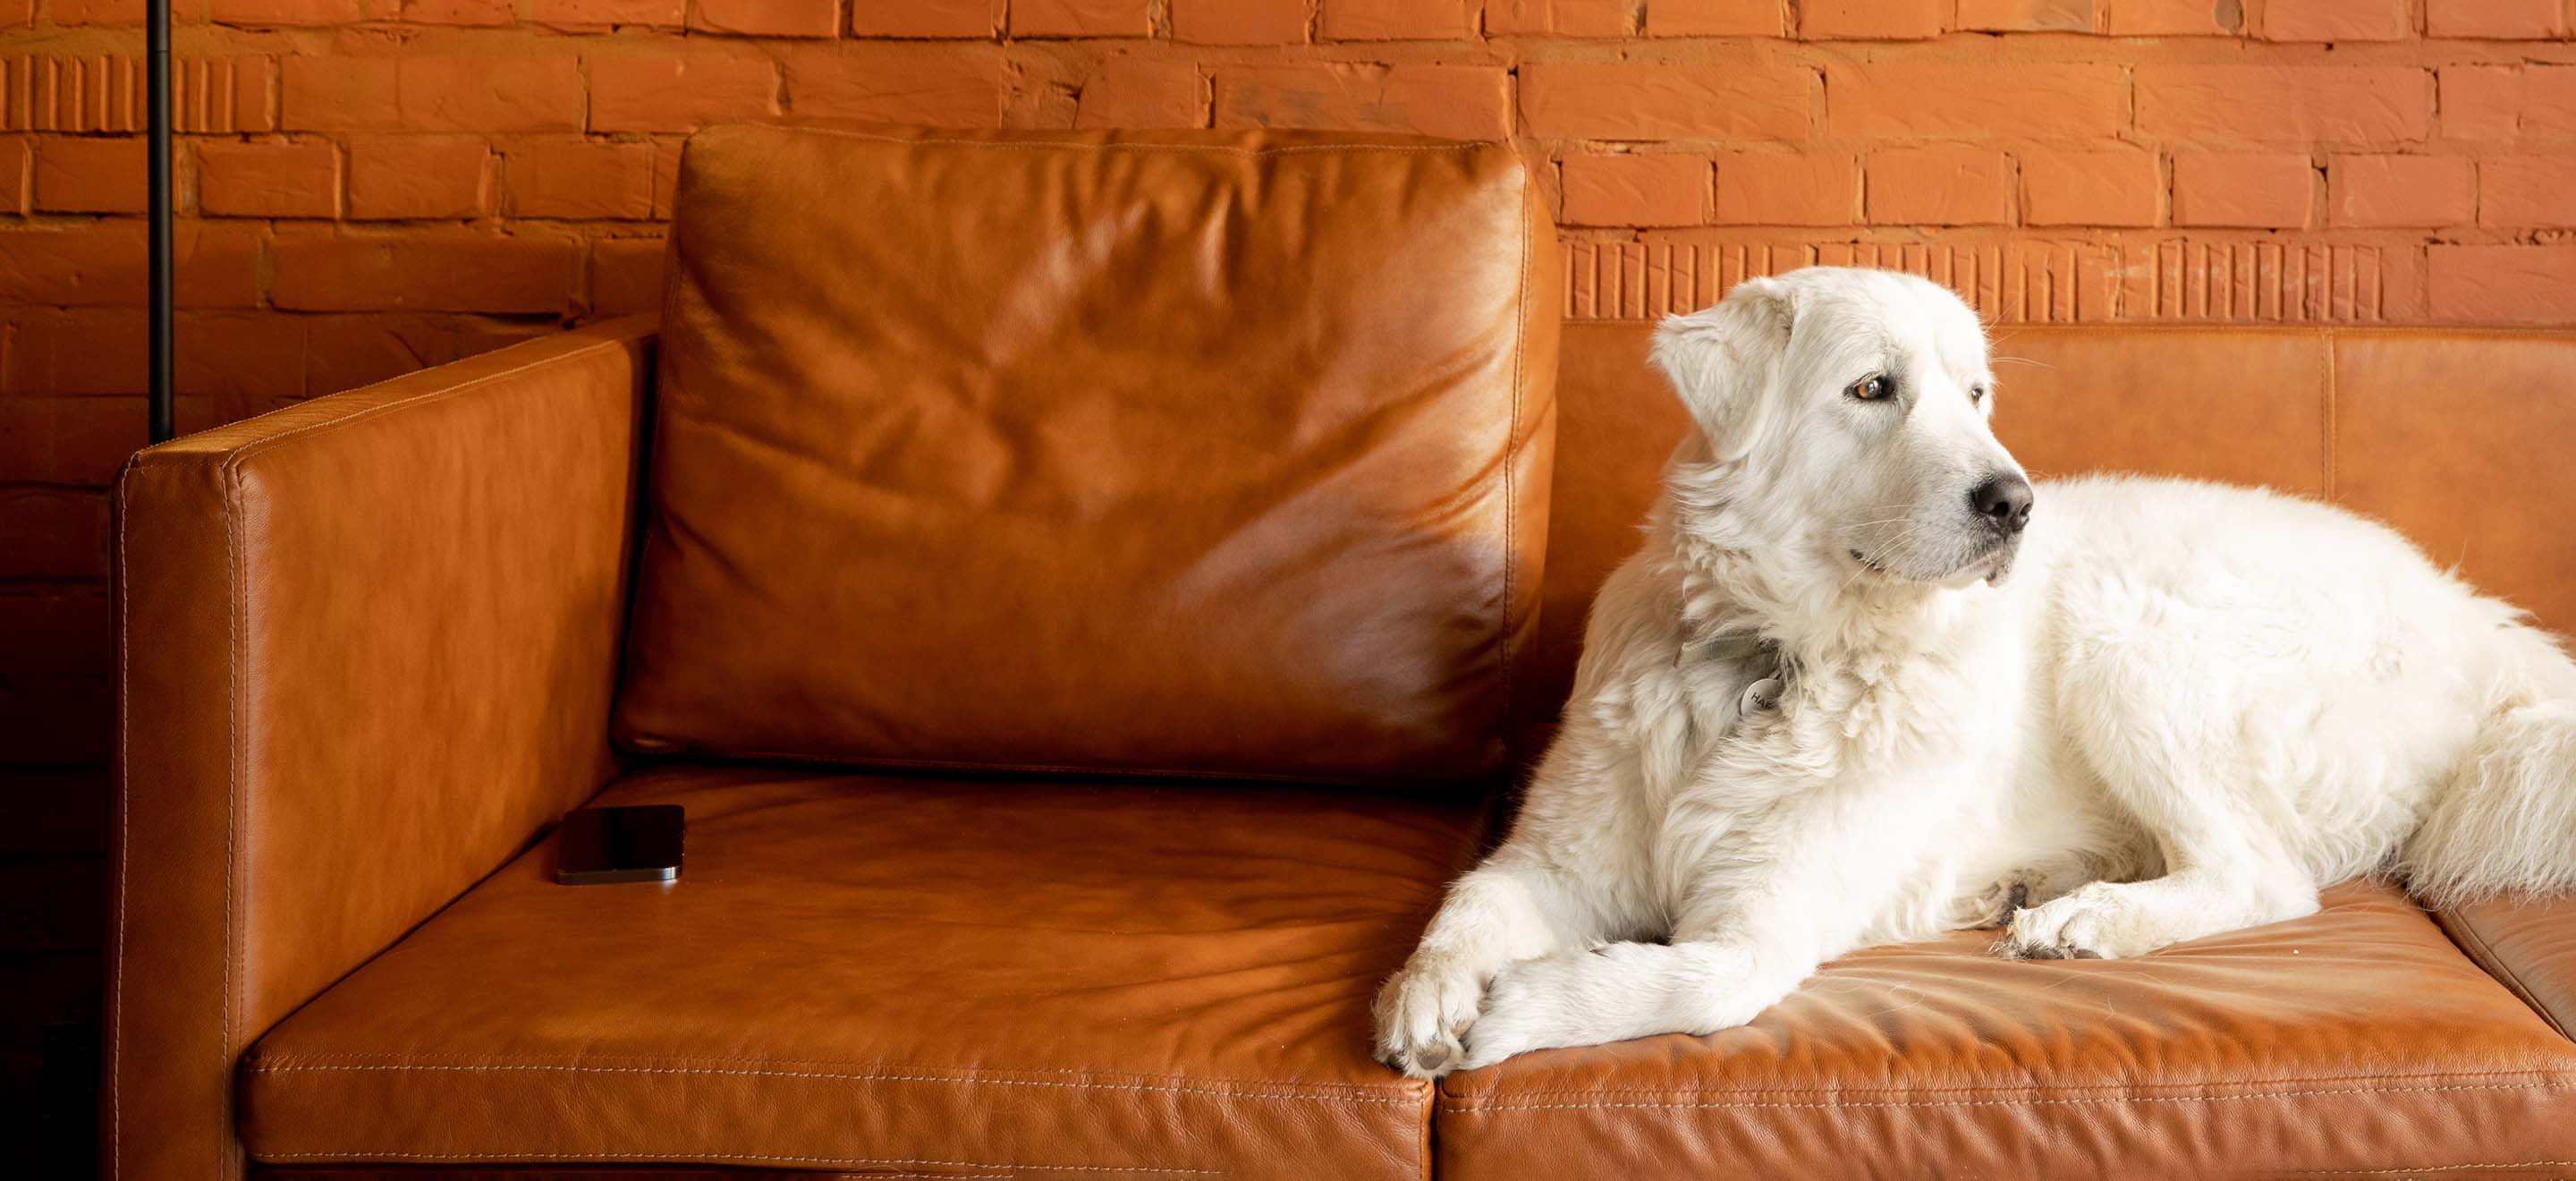 A white Maremma Sheepdog laying on a burnt orange colored couch in the living room image